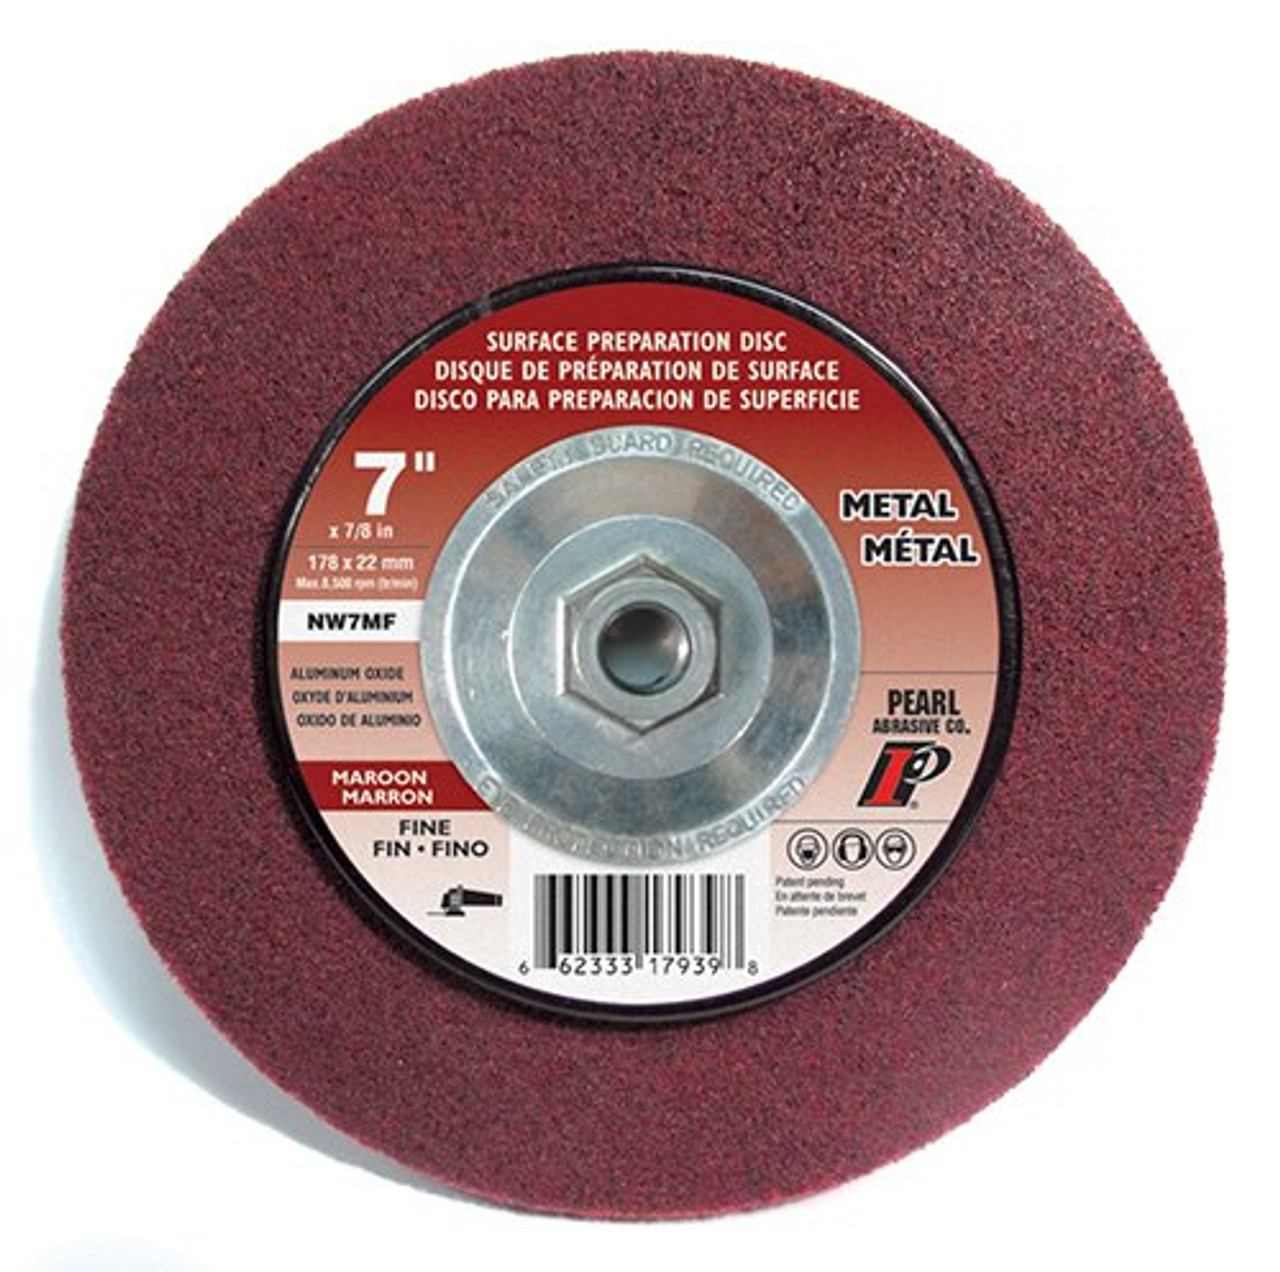 Pearl Abrasive NW7MF Premium Metal T27 Fine Surface Preparation Wheels, 7" x 7/8", Pack of 10